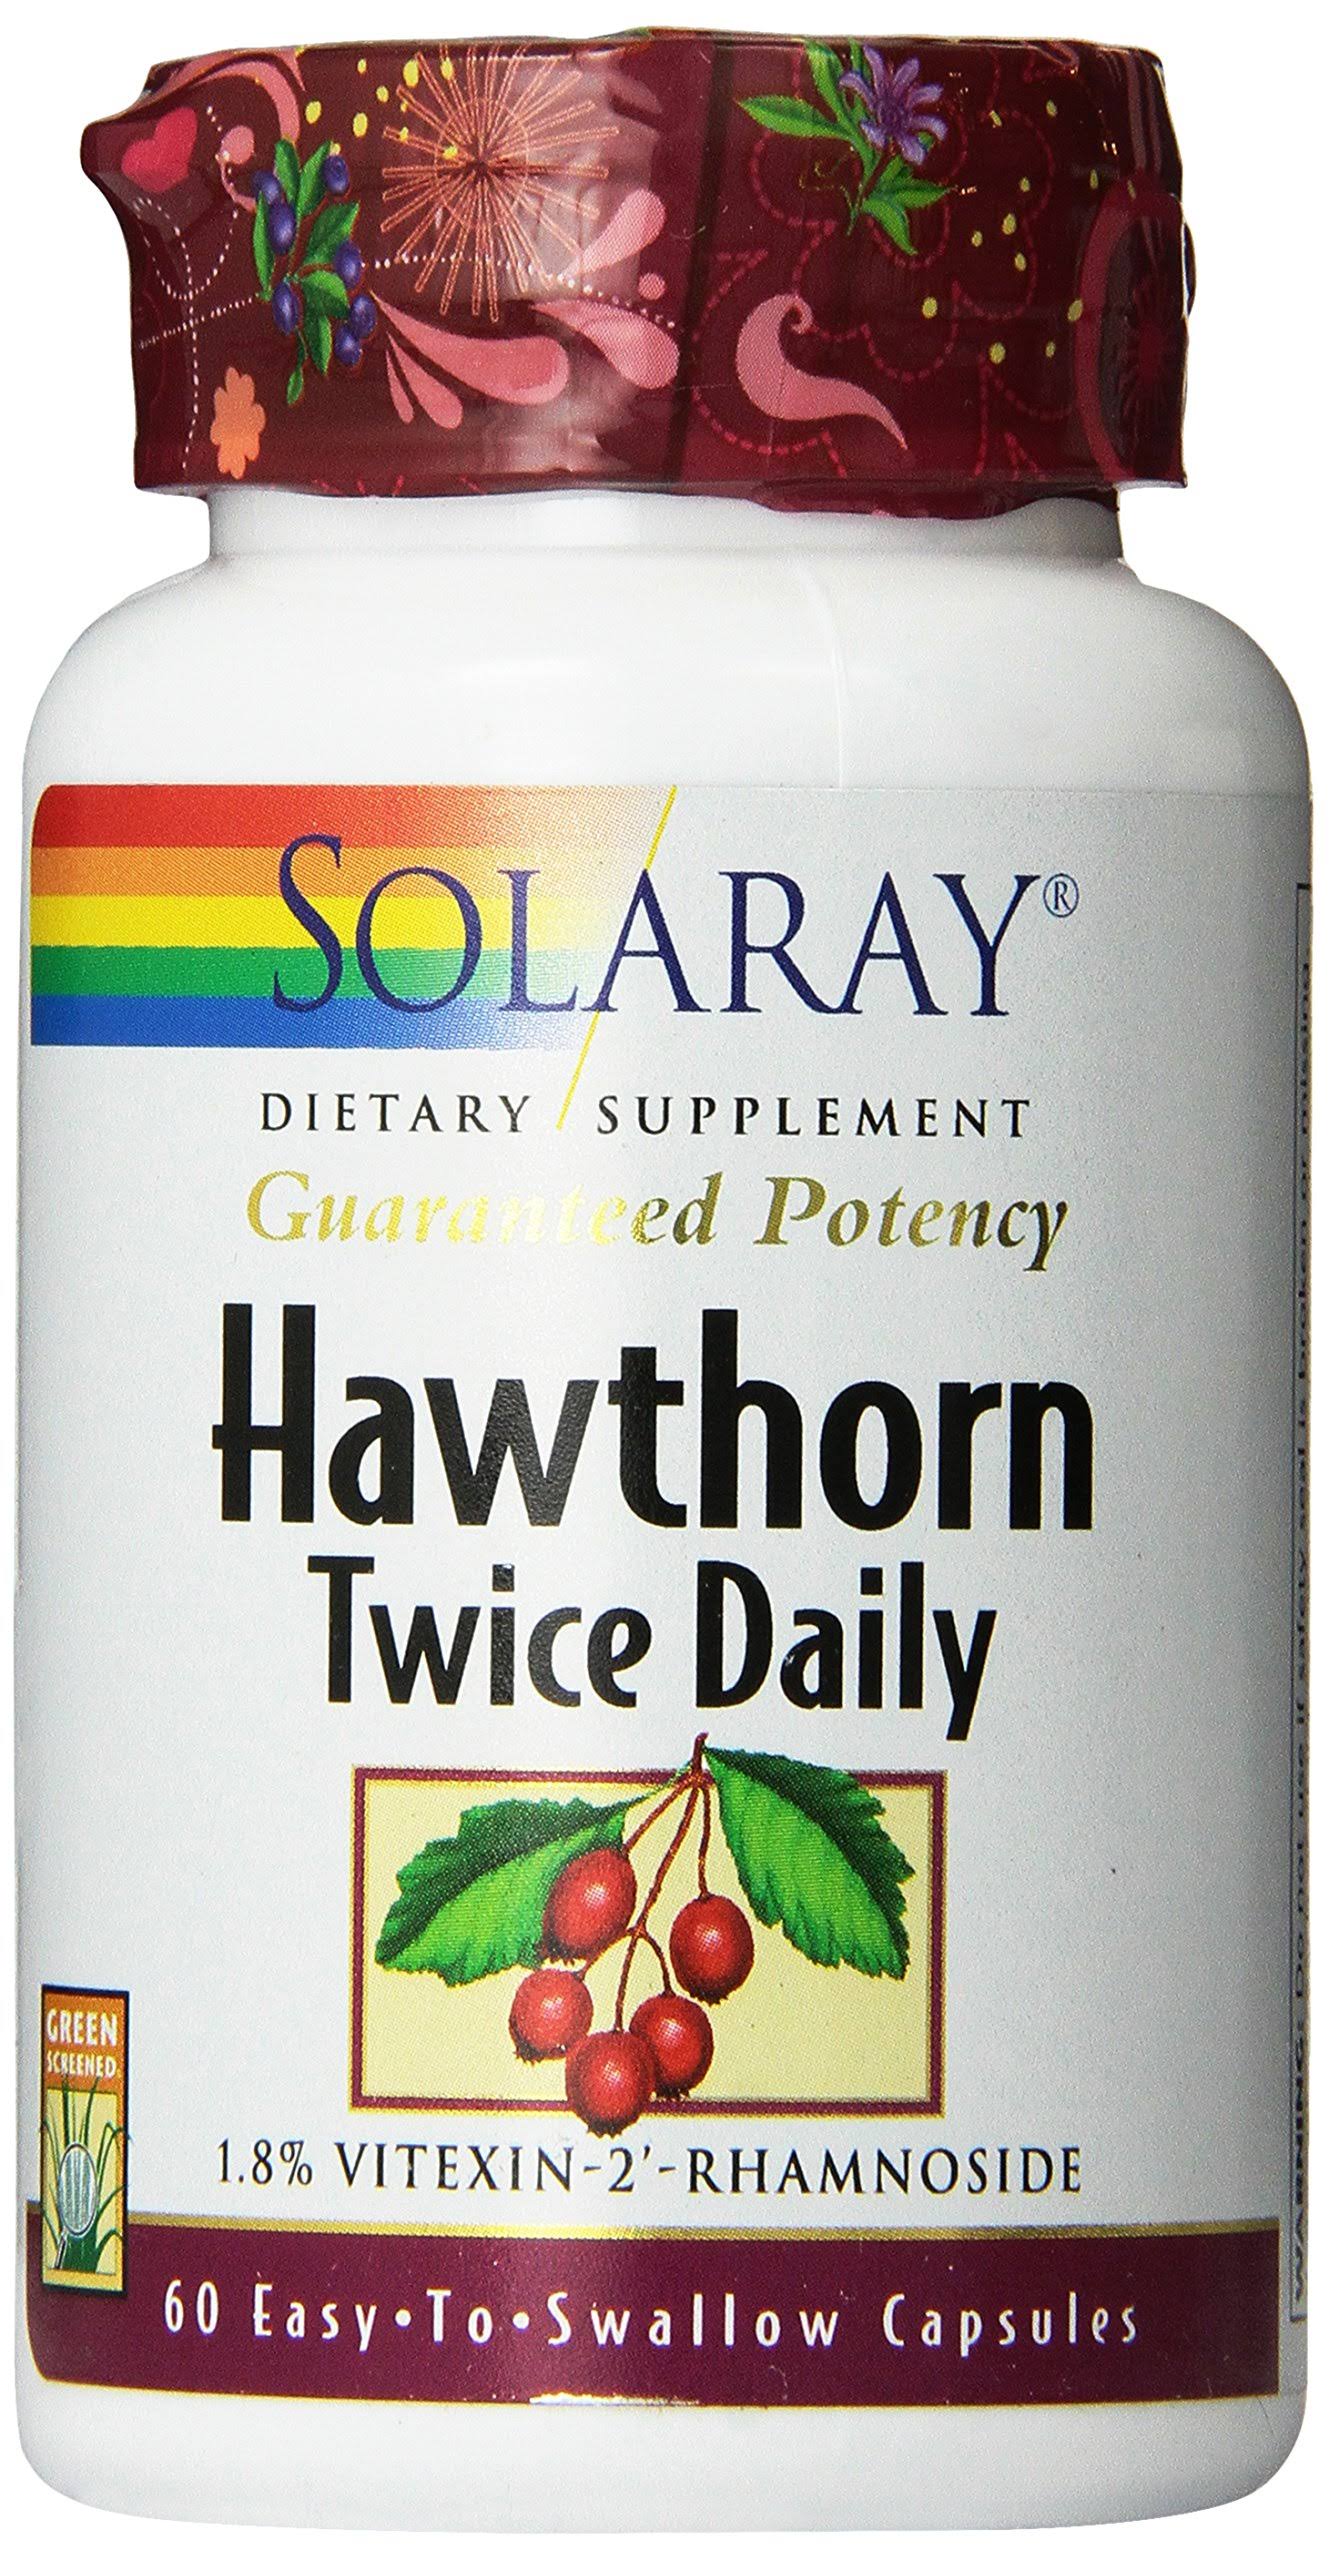 Solaray Hawthorn Two Daily Supplement - 60ct